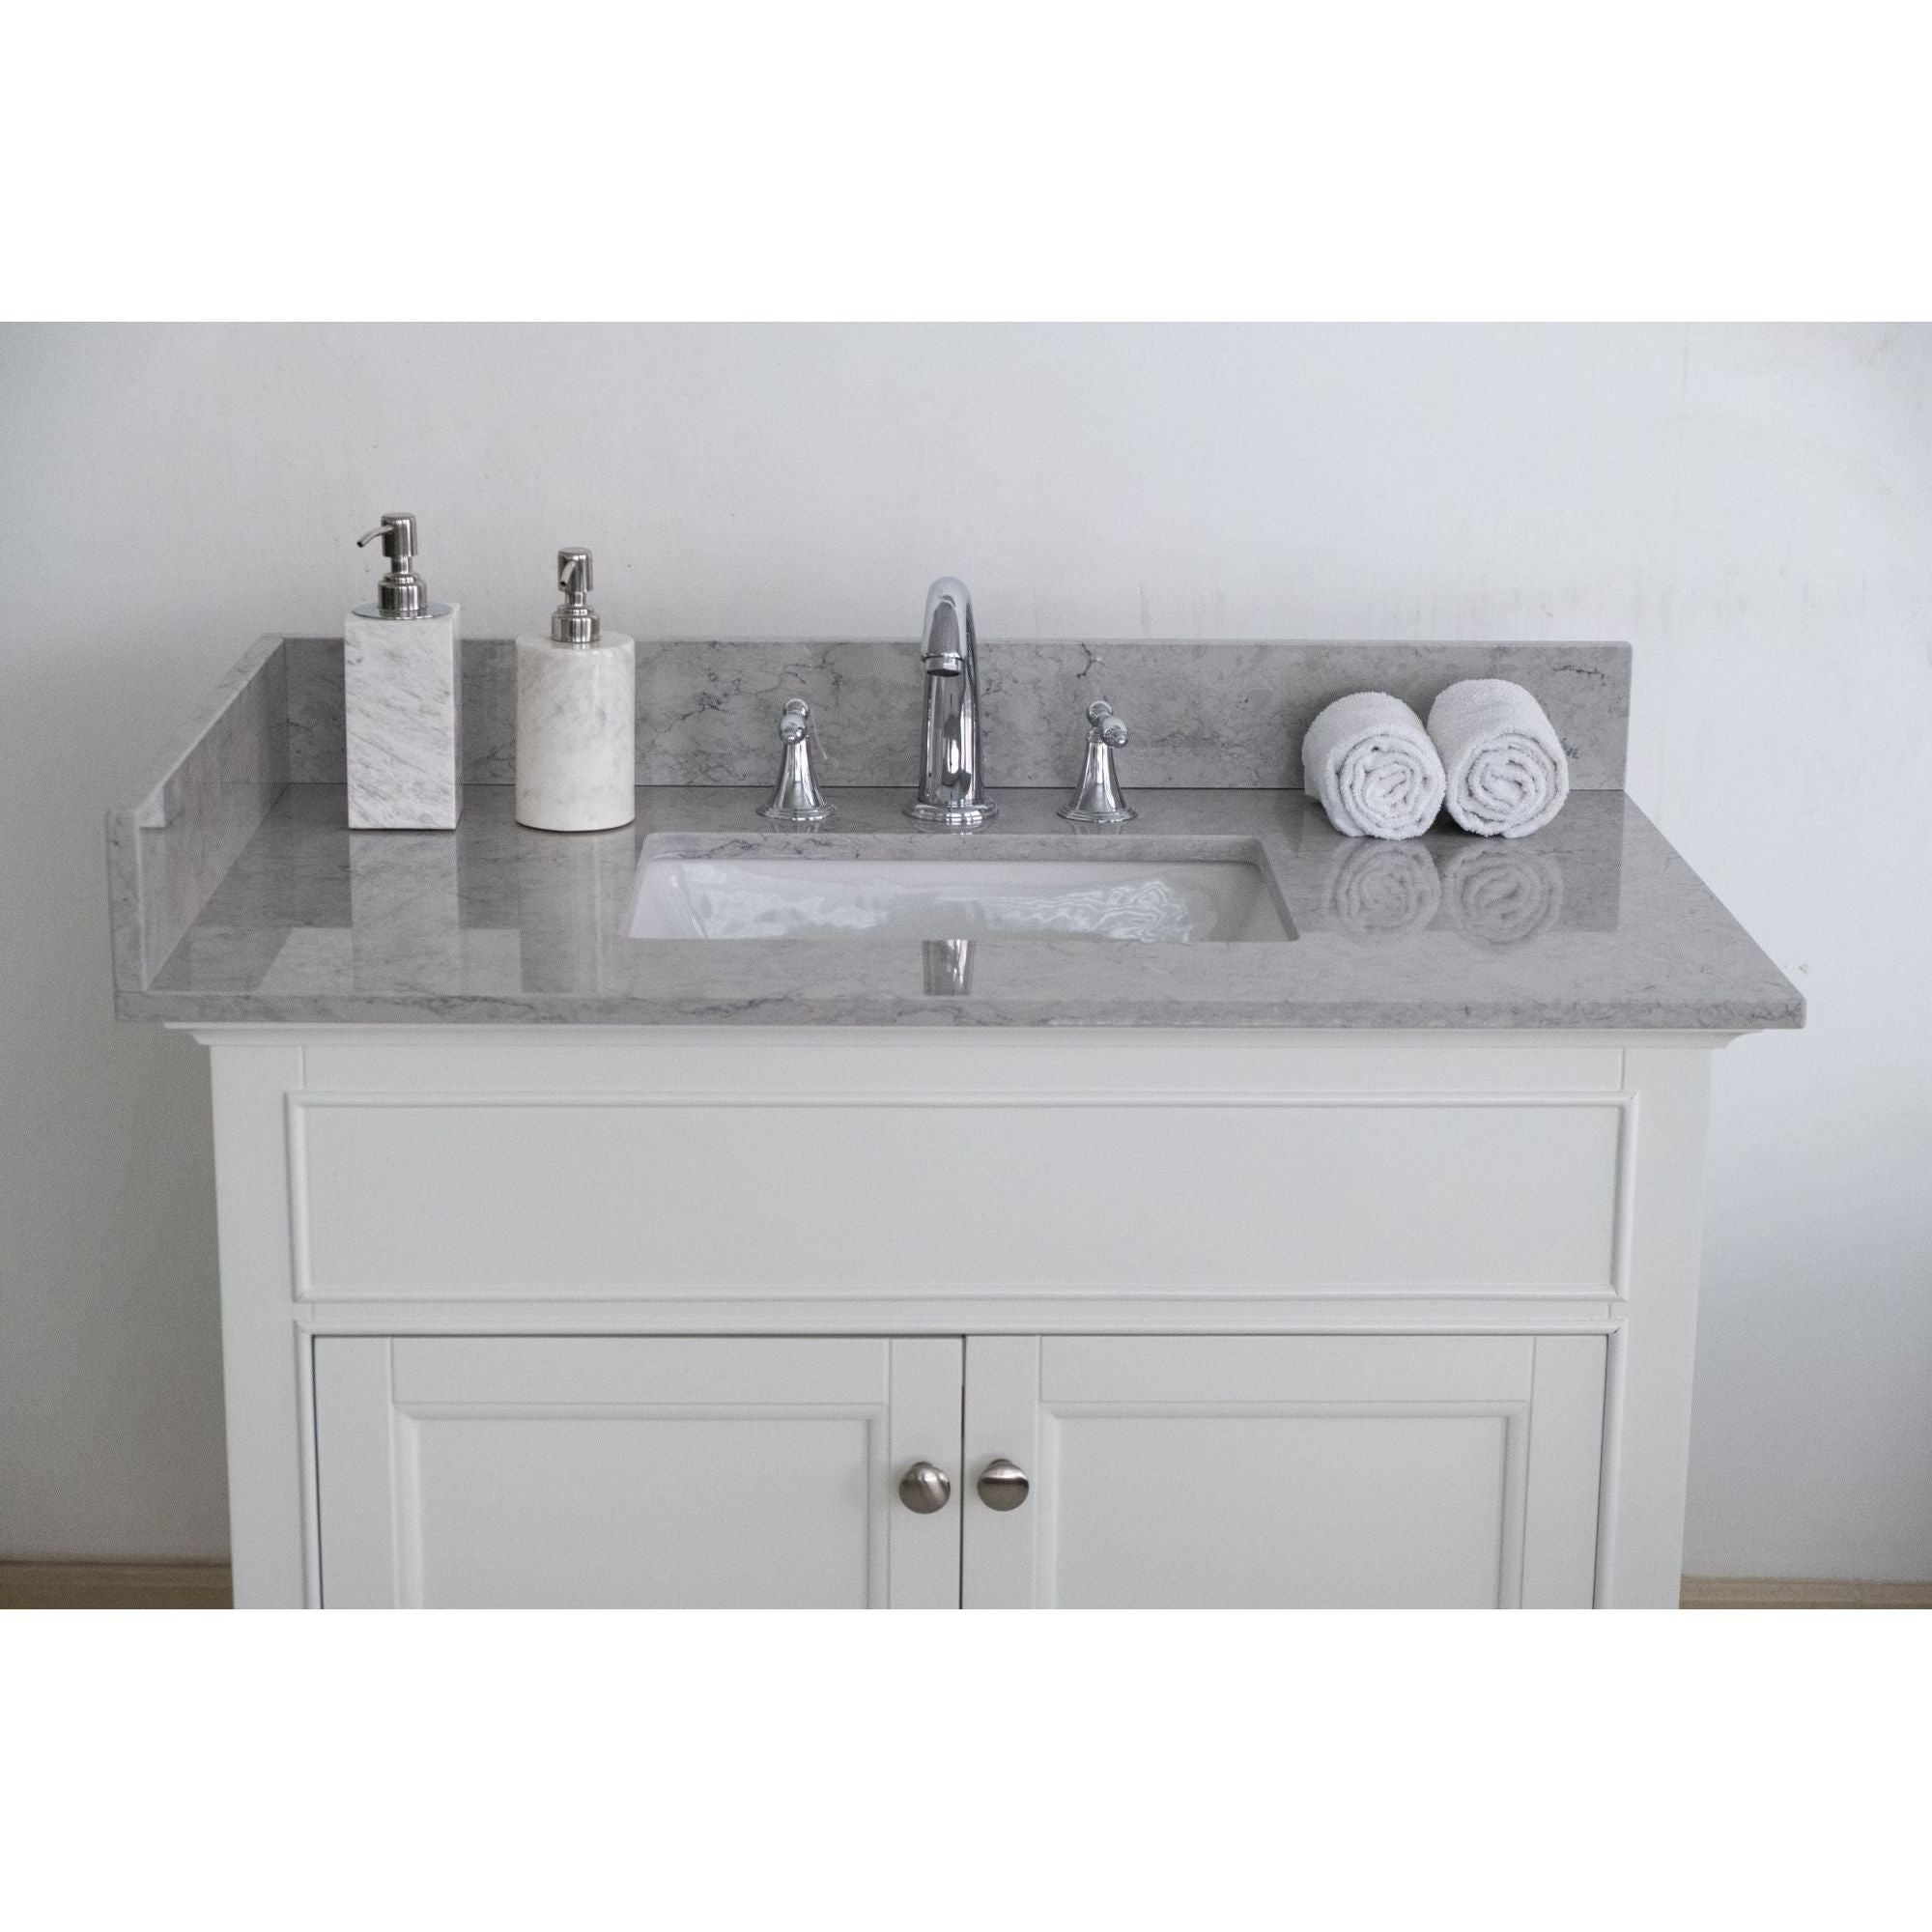 31 inches bathroom stone vanity top calacatta gray engineered marble color with undermount ceramic sink and 3 faucet hole with backsplash Moorescarts